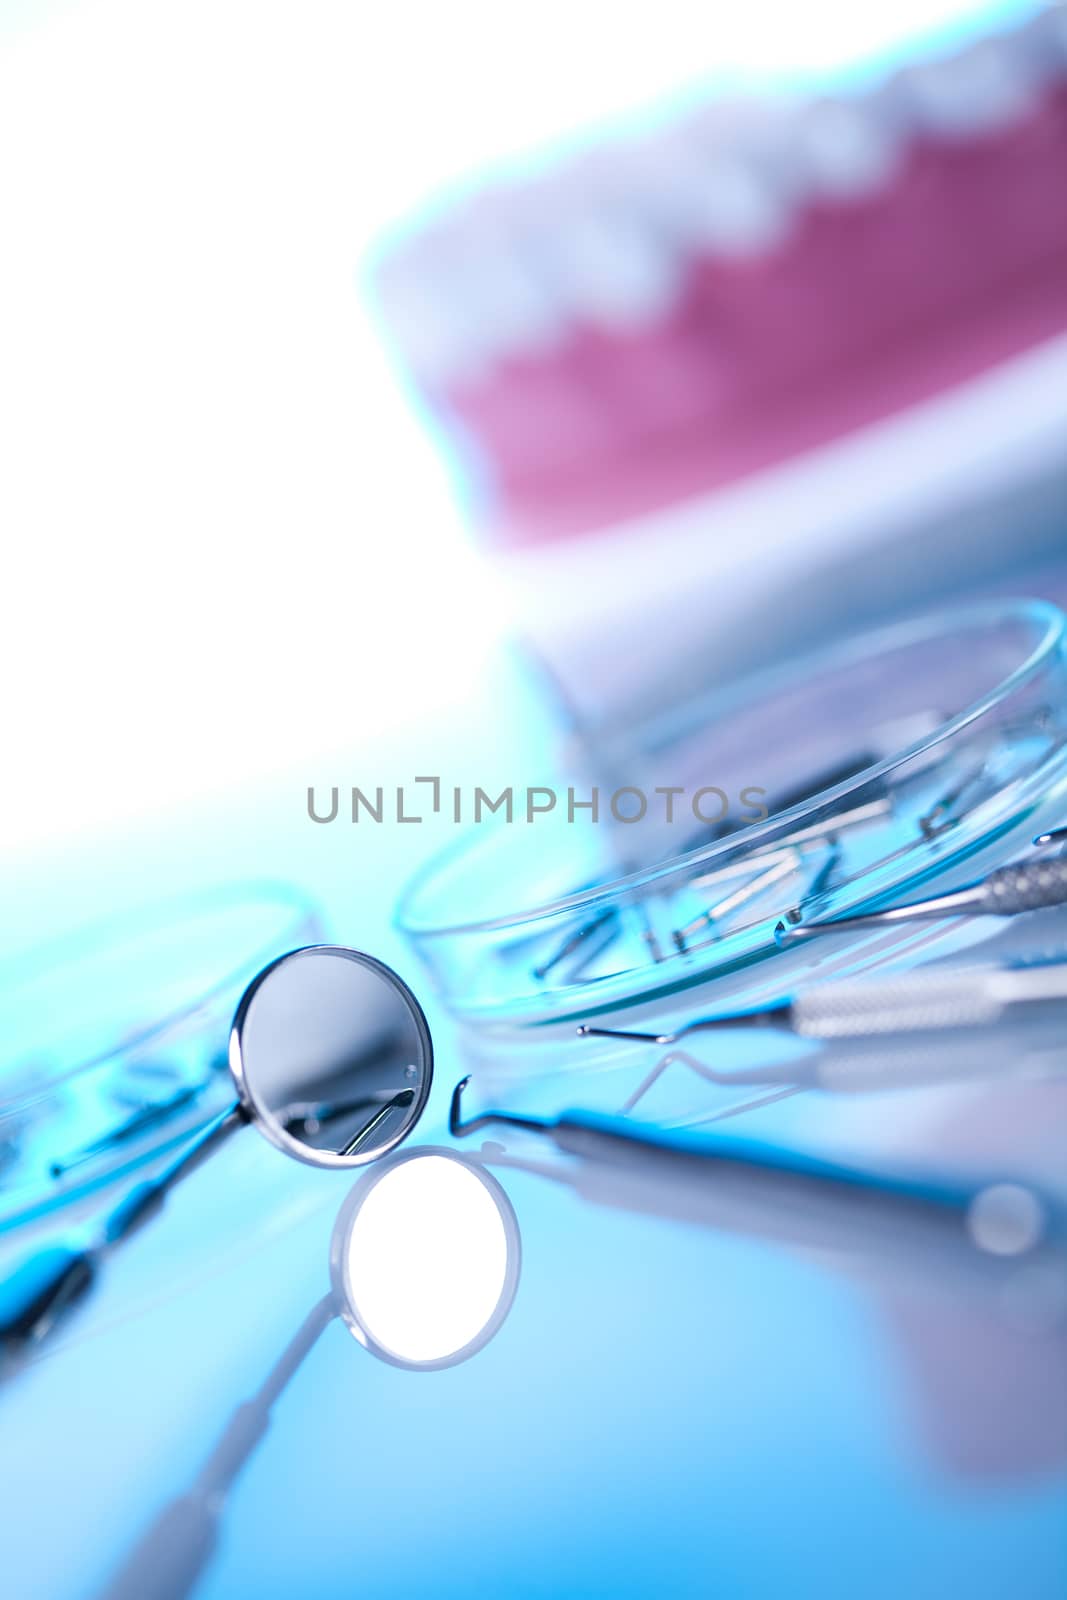 Dental tools, bright colorful tone concept by JanPietruszka